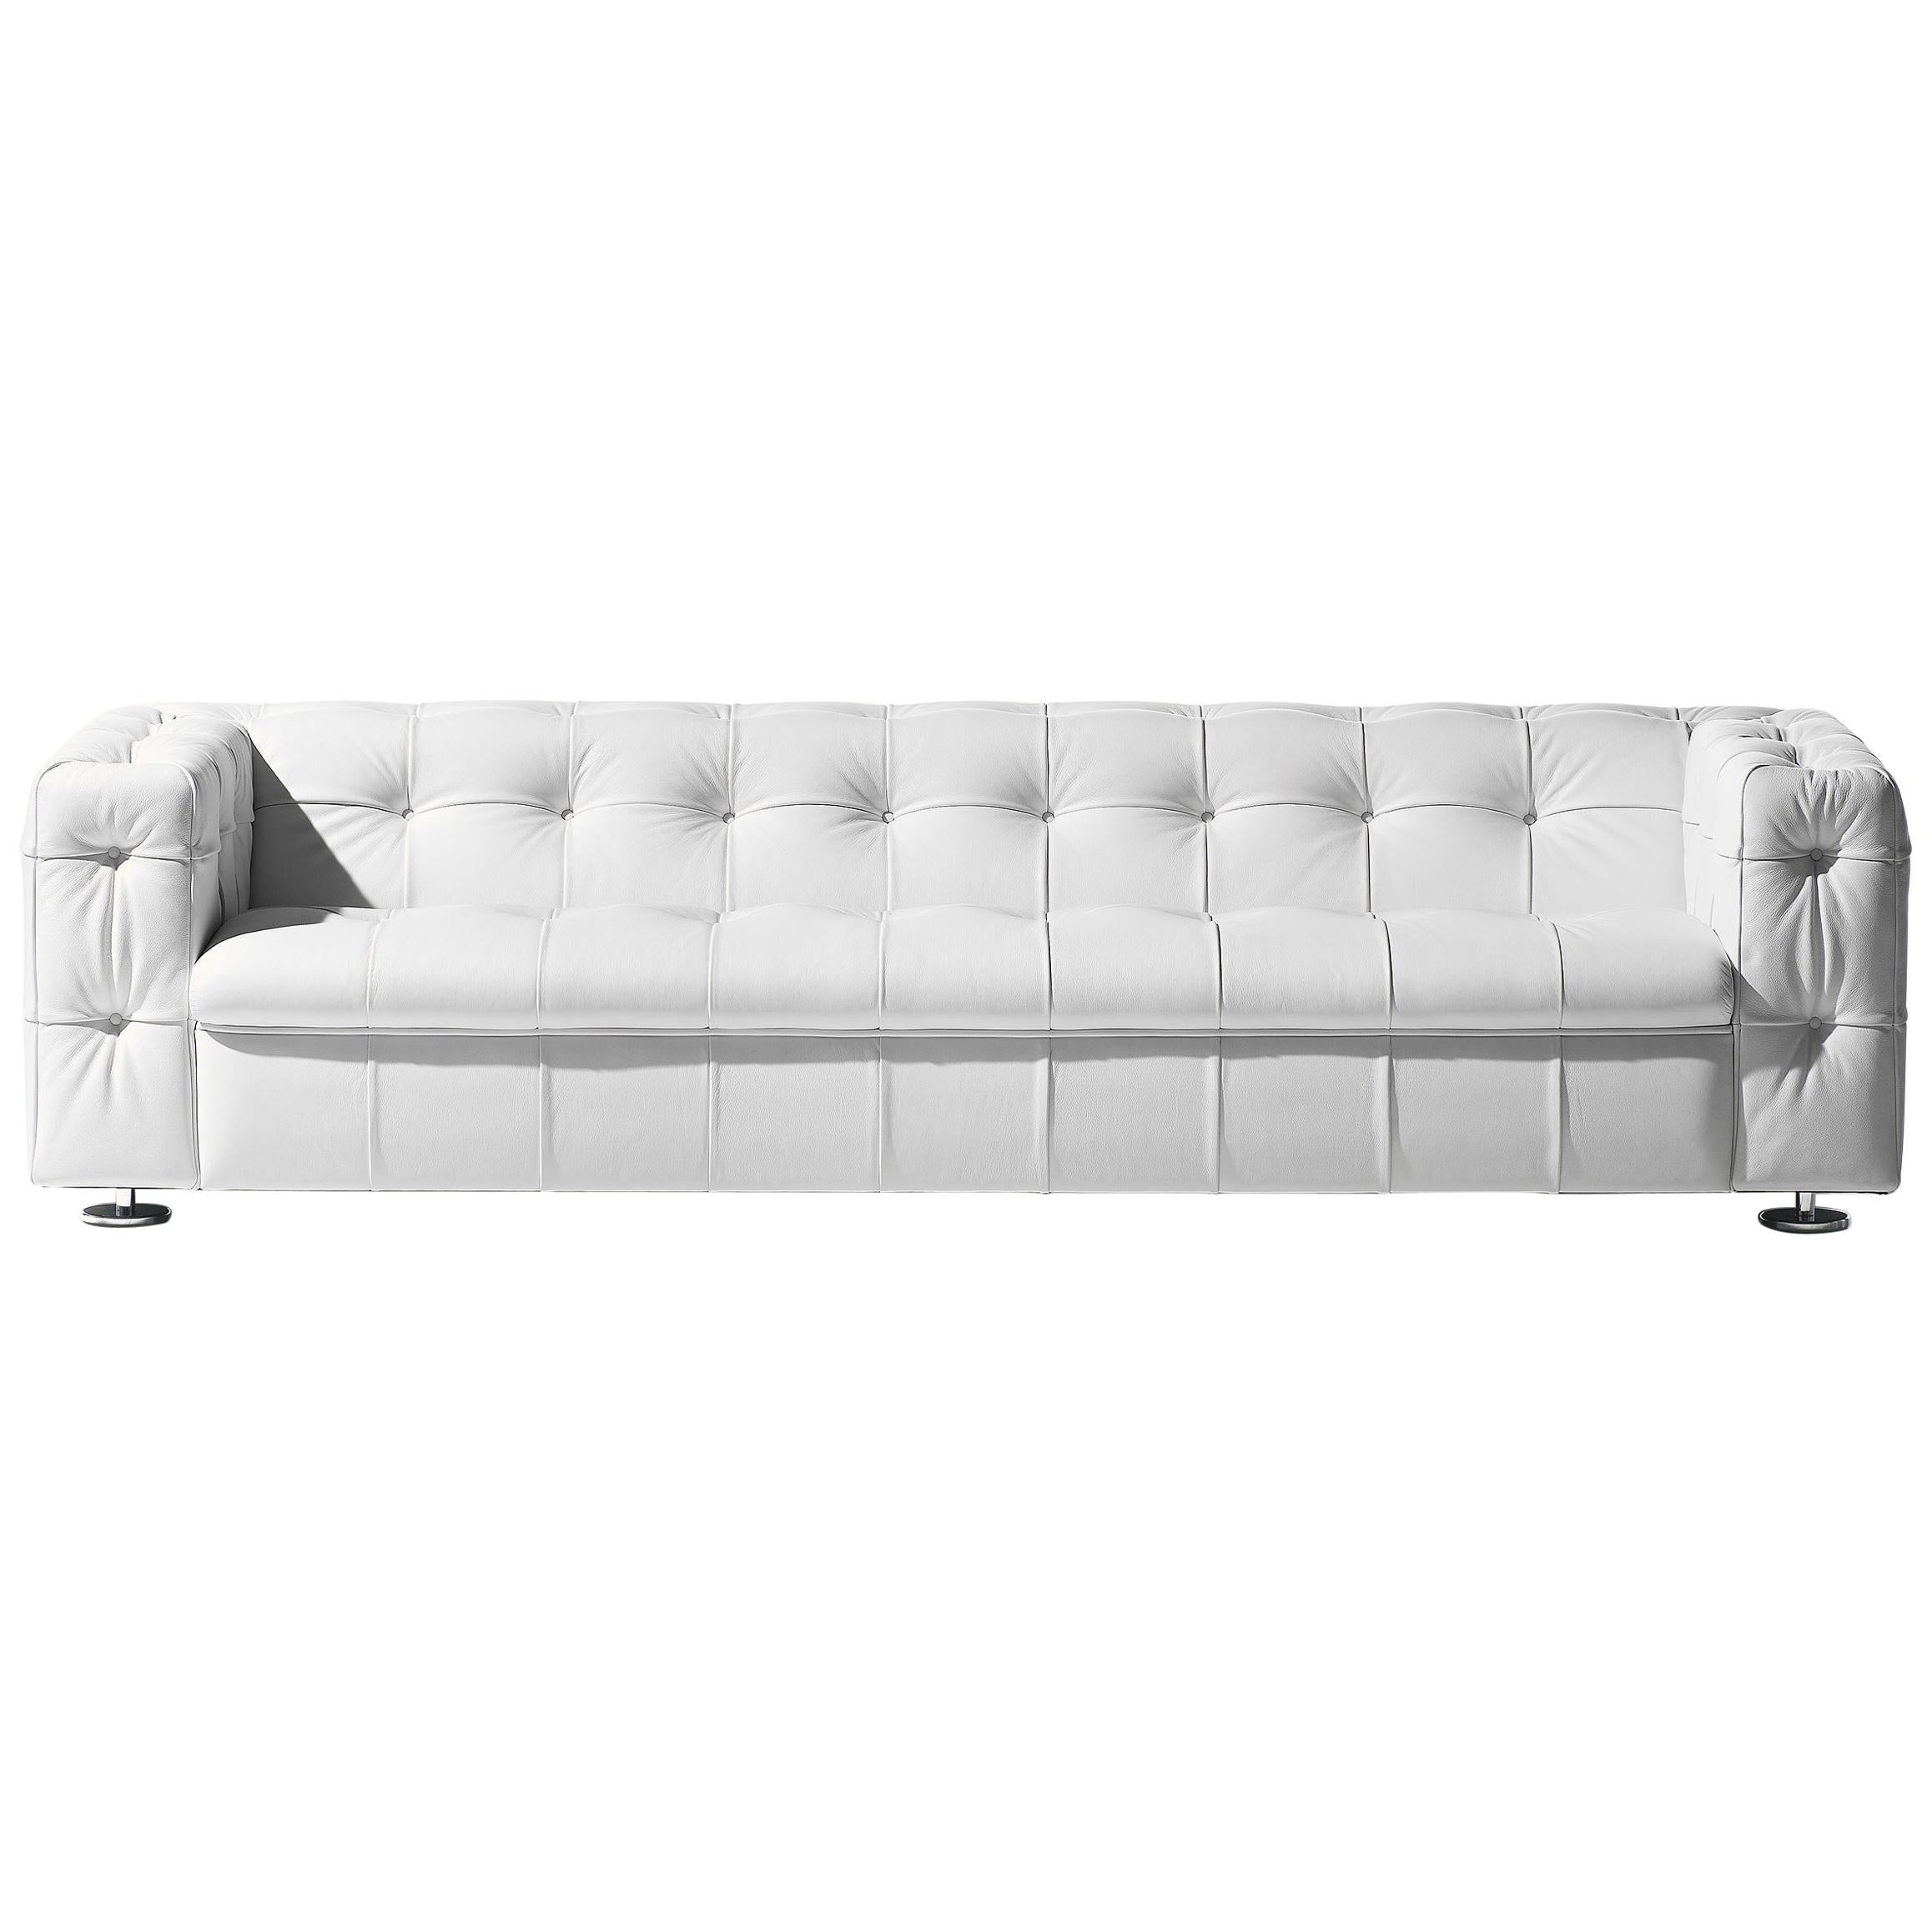 De Sede RH-306 Three-Seat Sofa in Snow Upholstery by Robert Haussmann For Sale